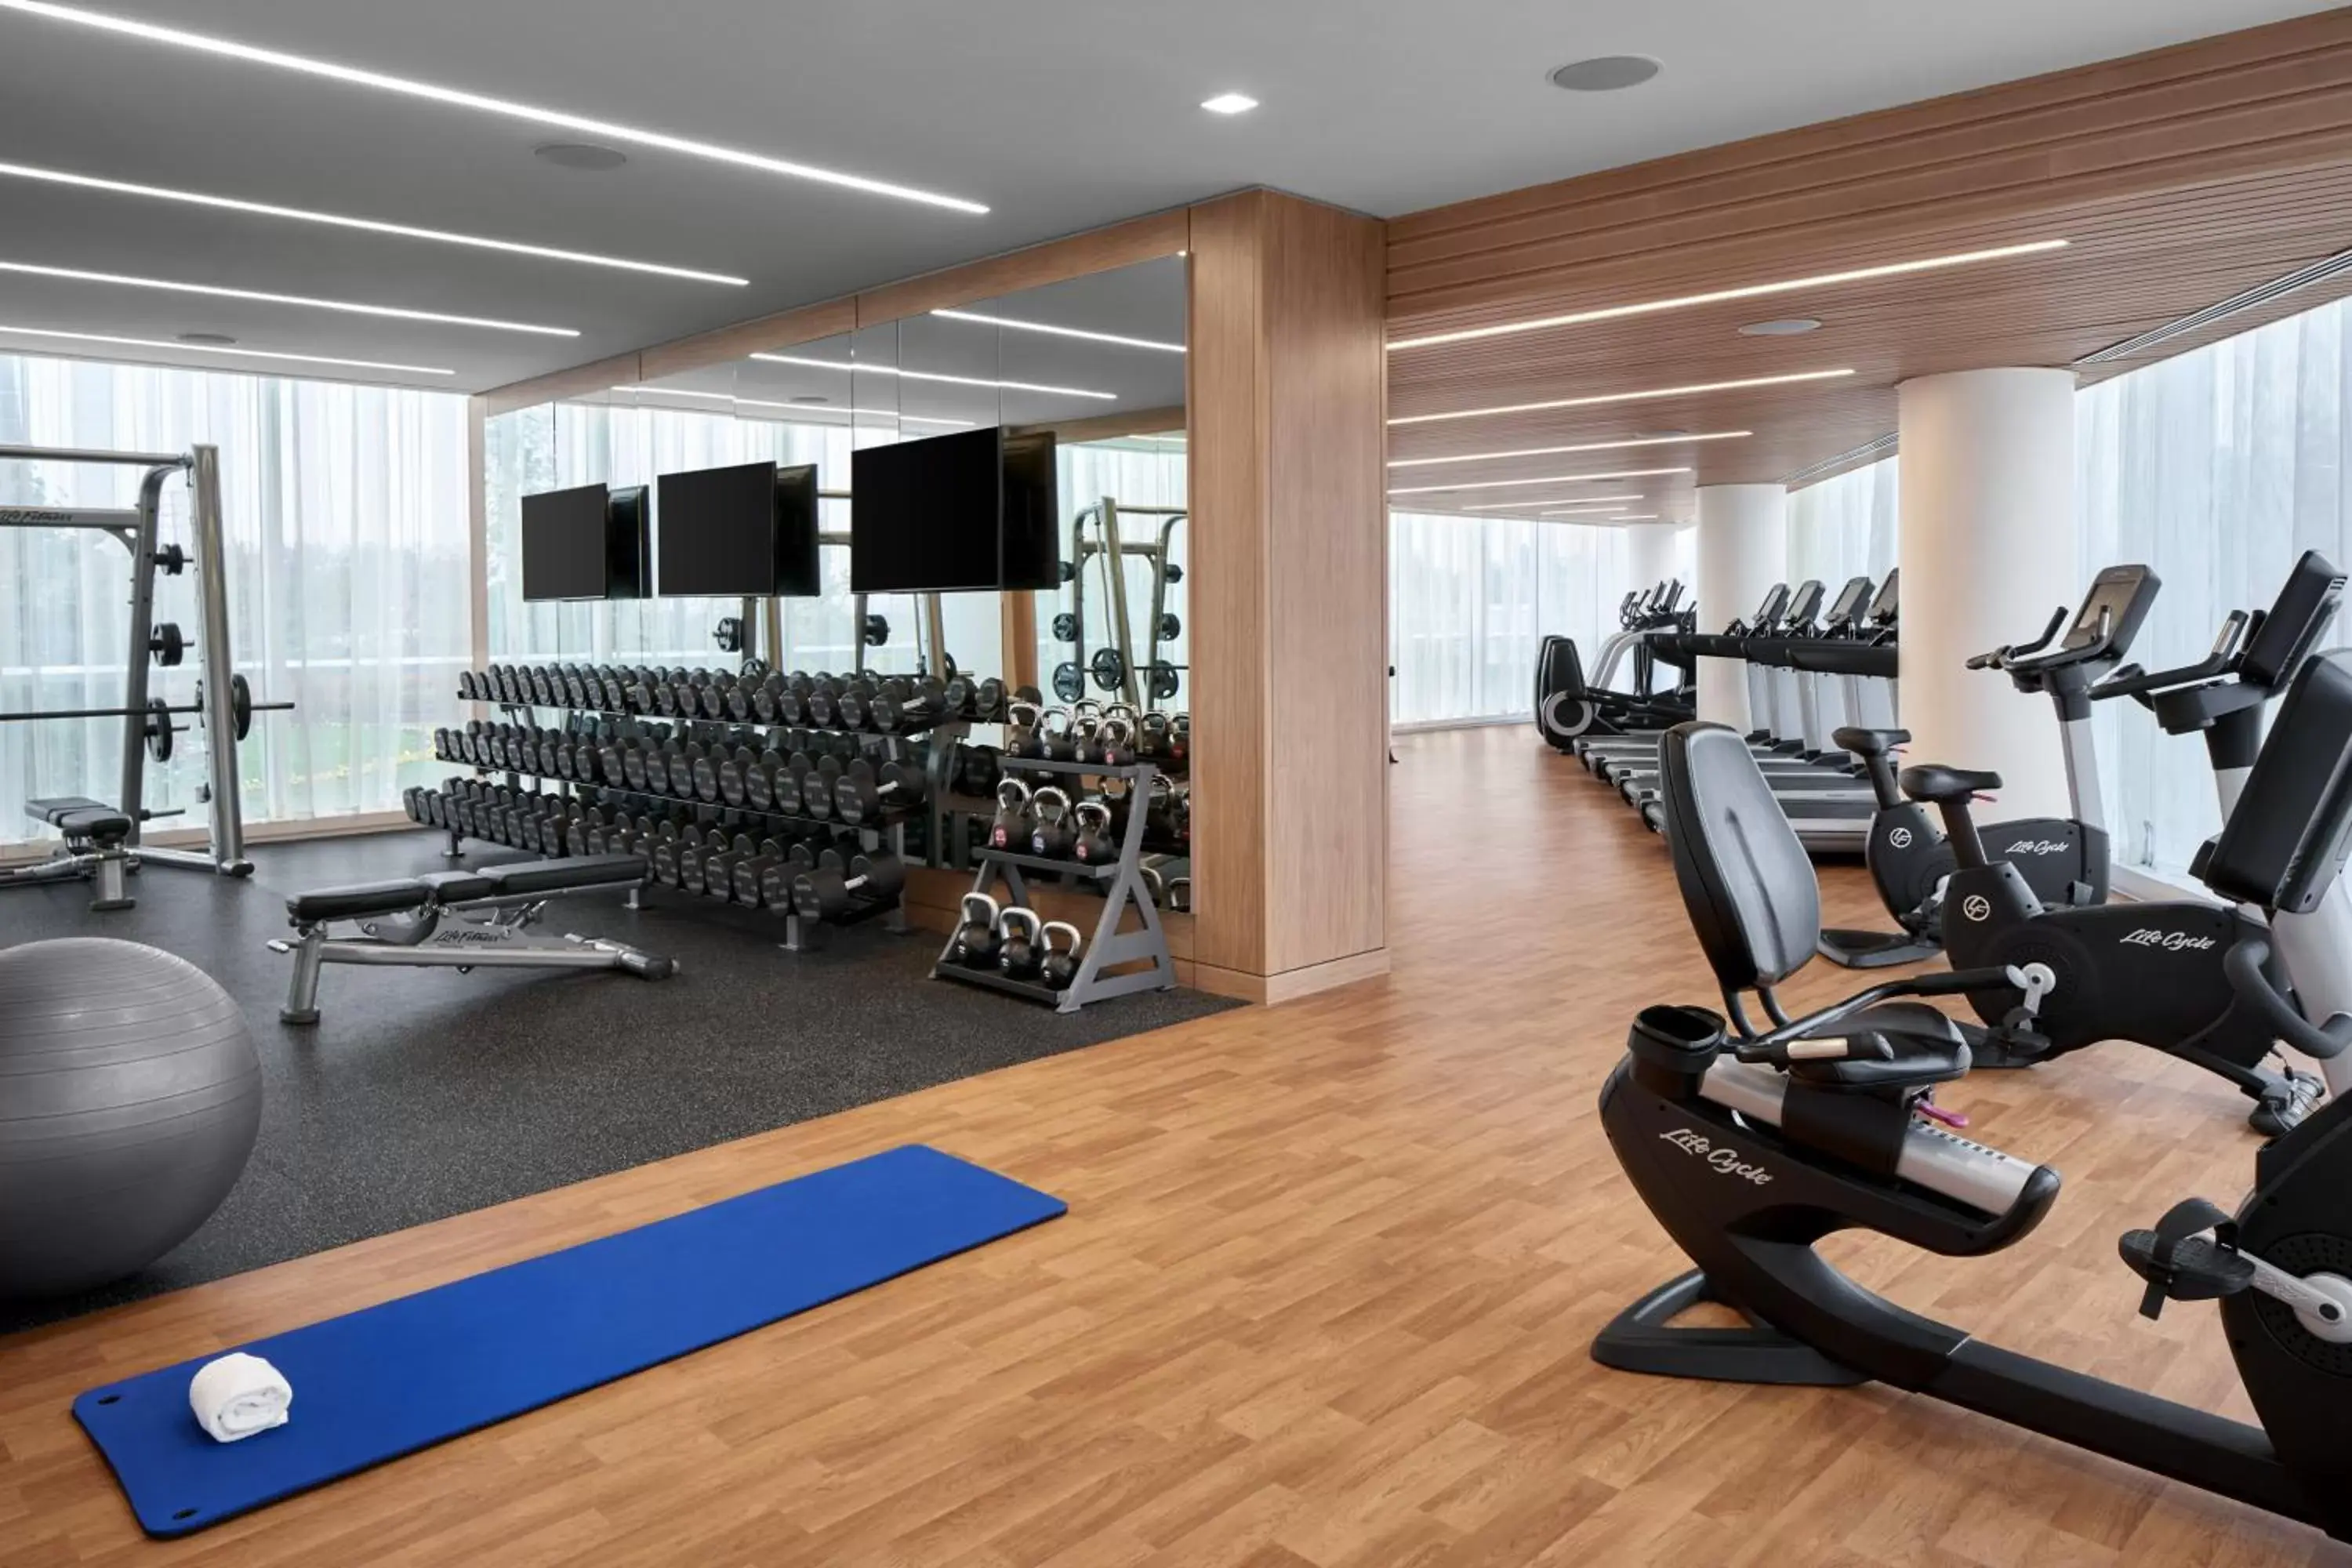 Fitness centre/facilities, Fitness Center/Facilities in MGM National Harbor